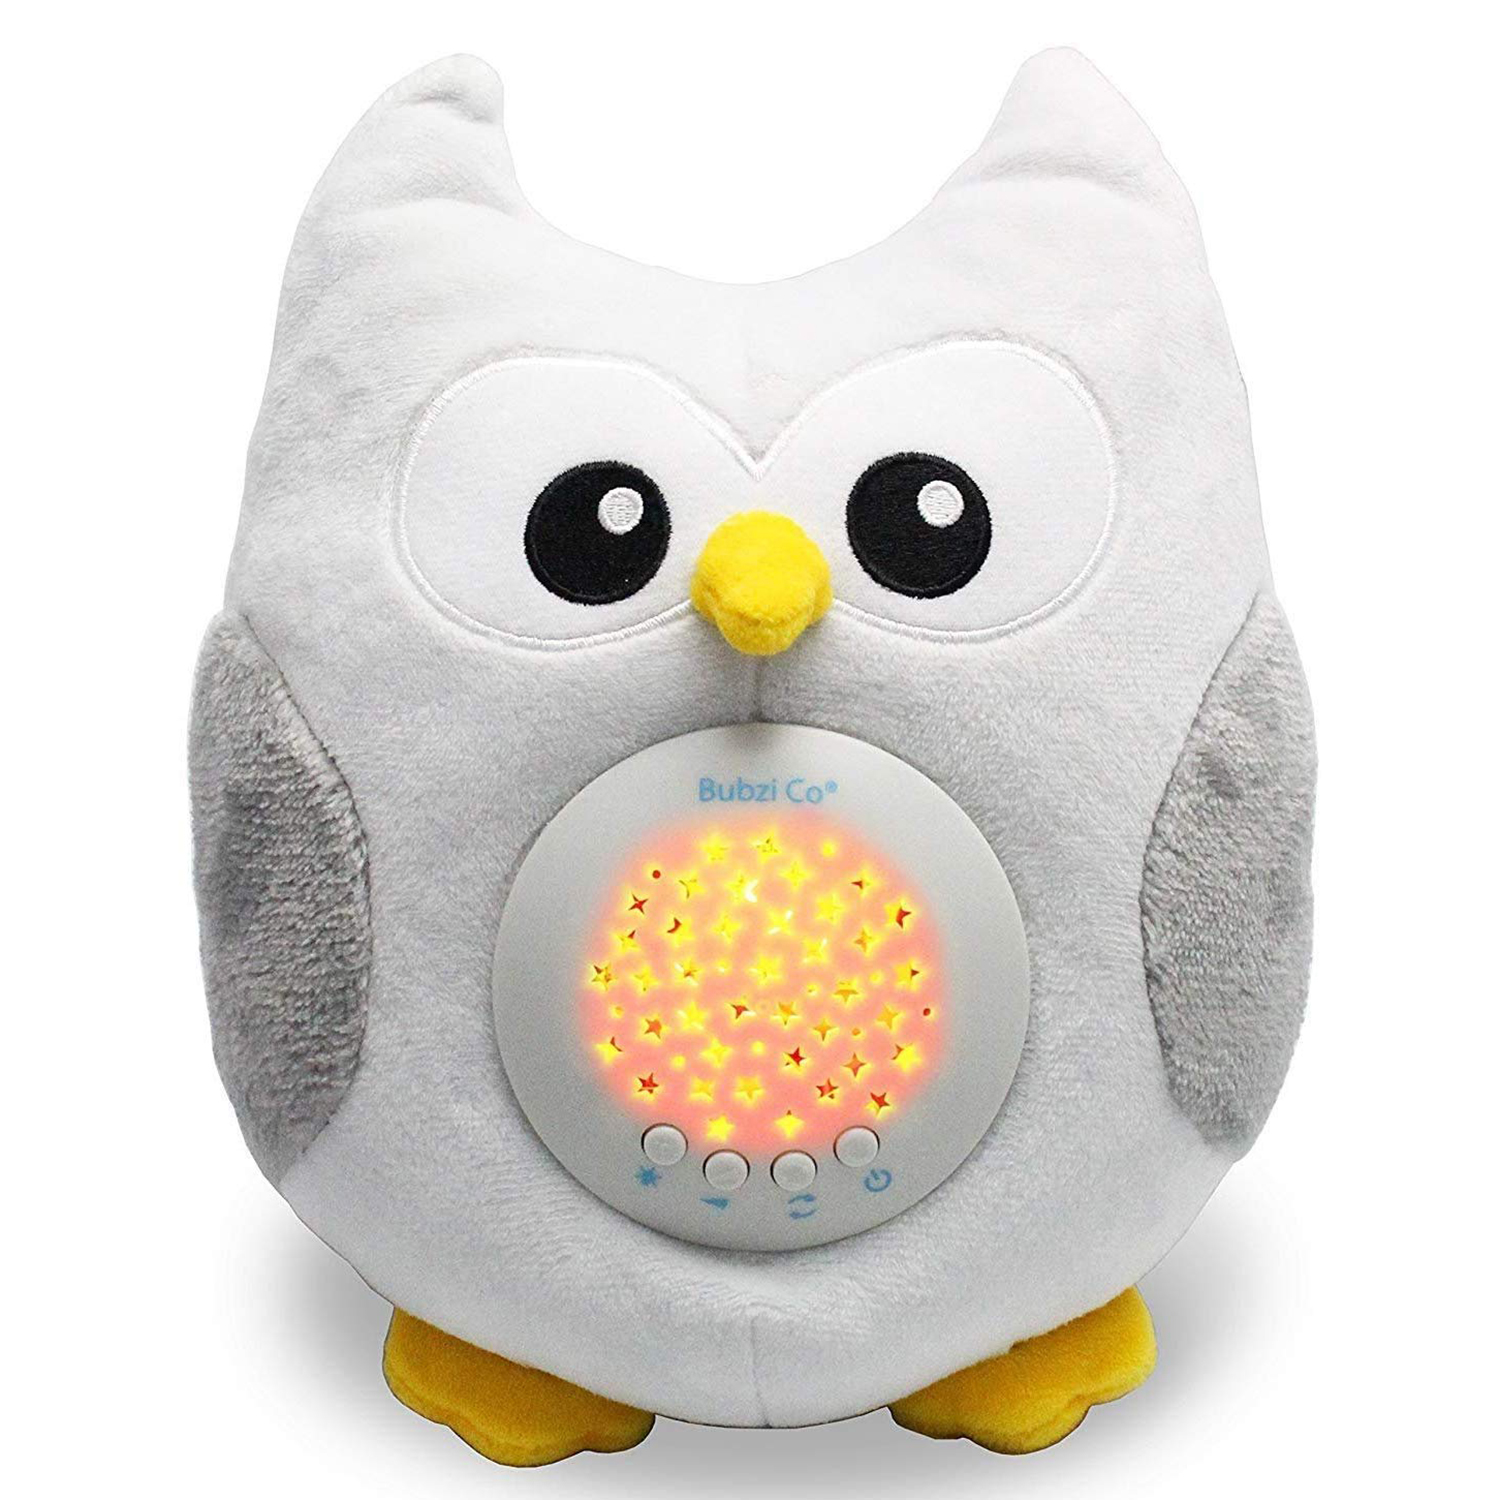 Bubzi Co. Baby Soother 